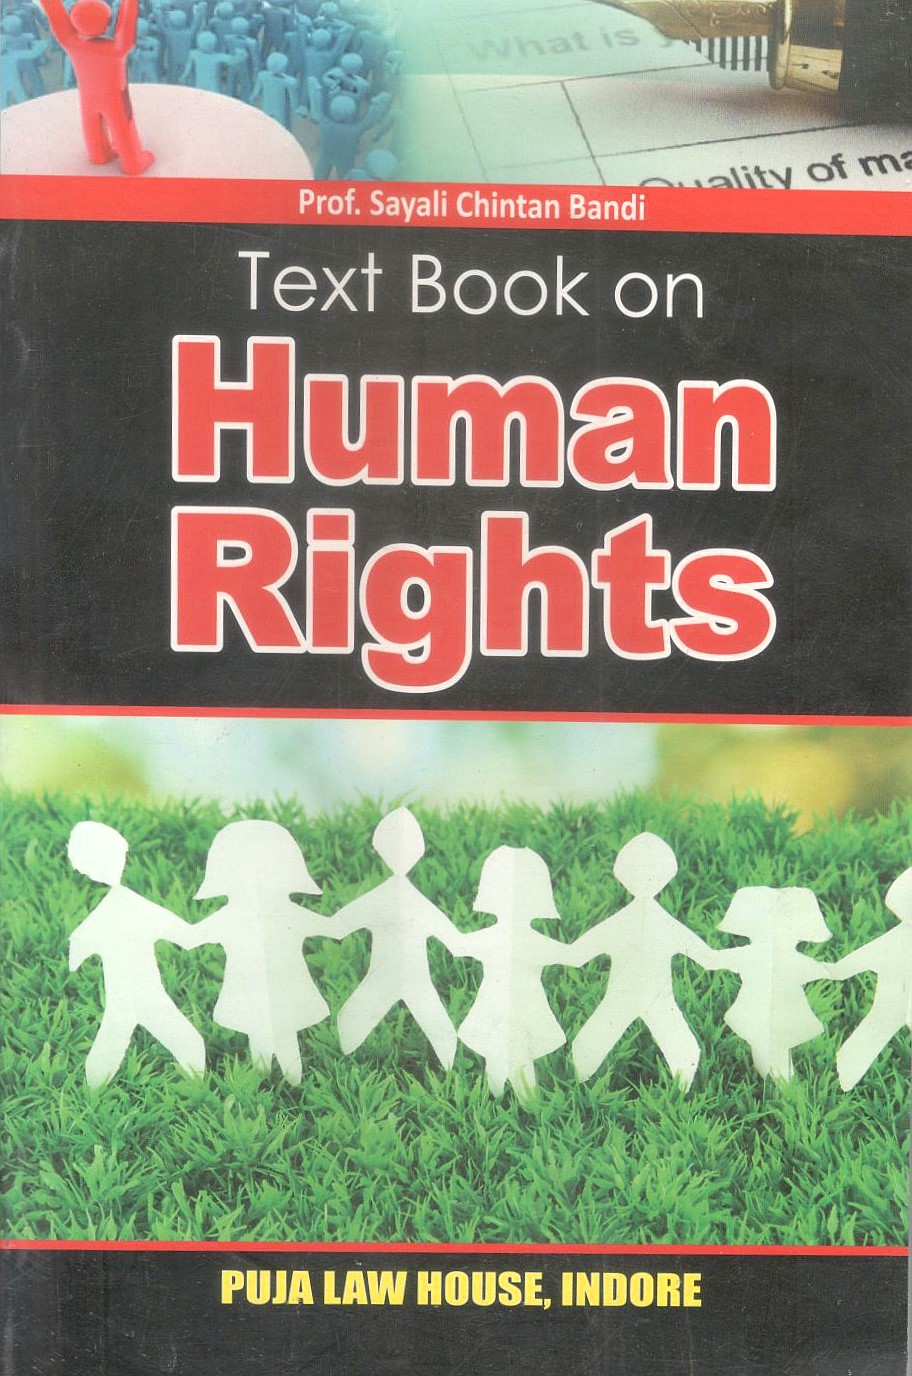 Text book on Human Rights